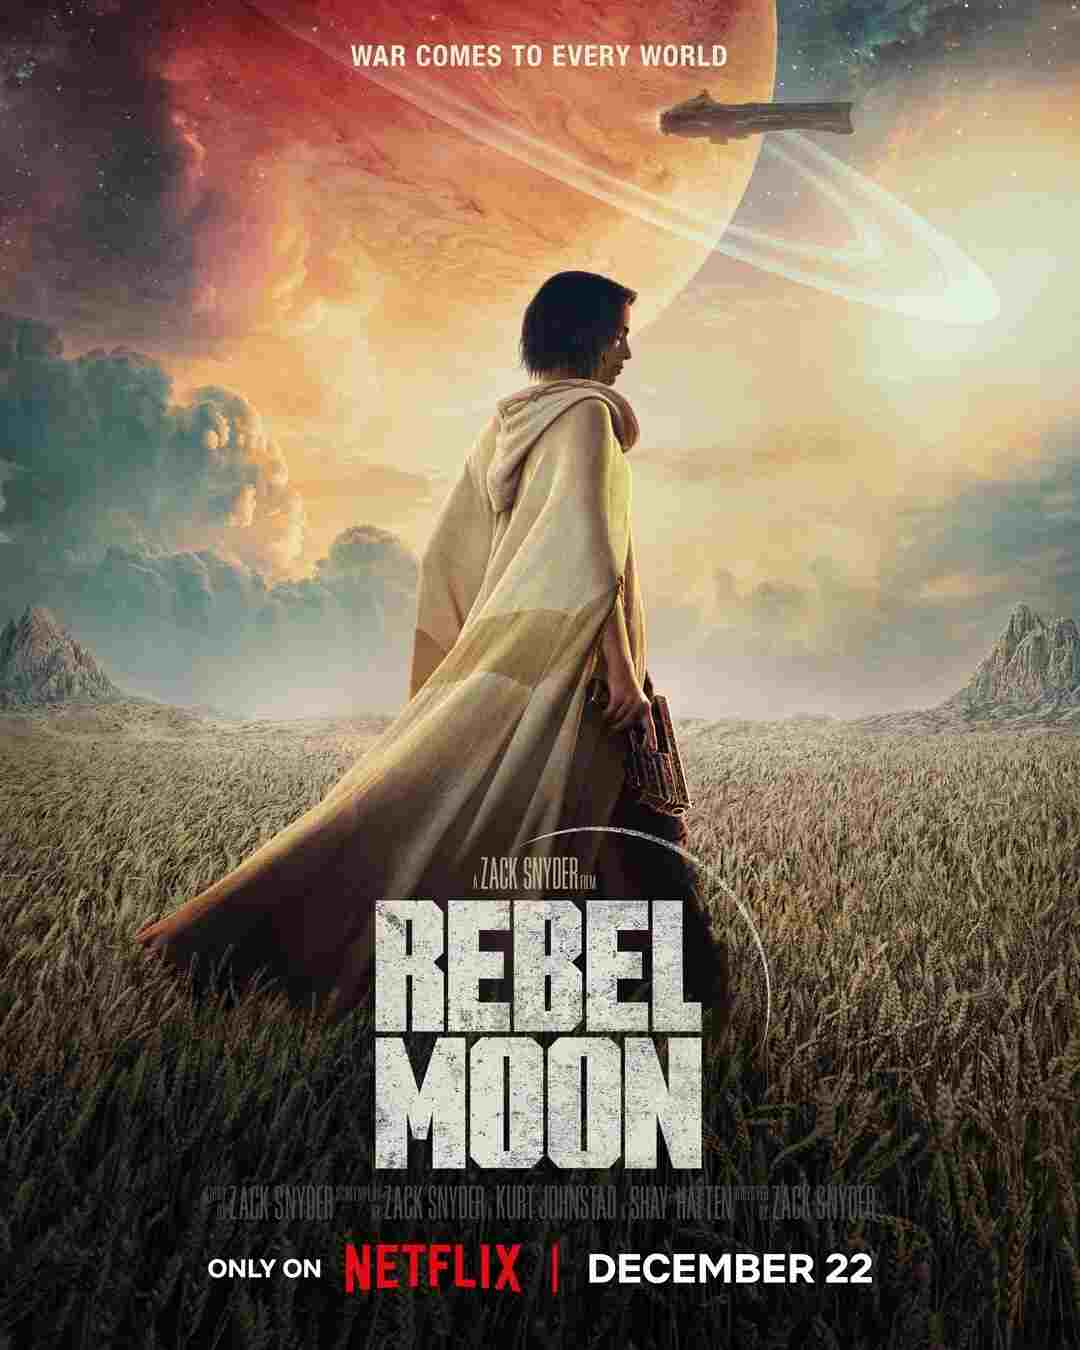 How long exactly is Jack Snyder’s “Rebel Moon”?